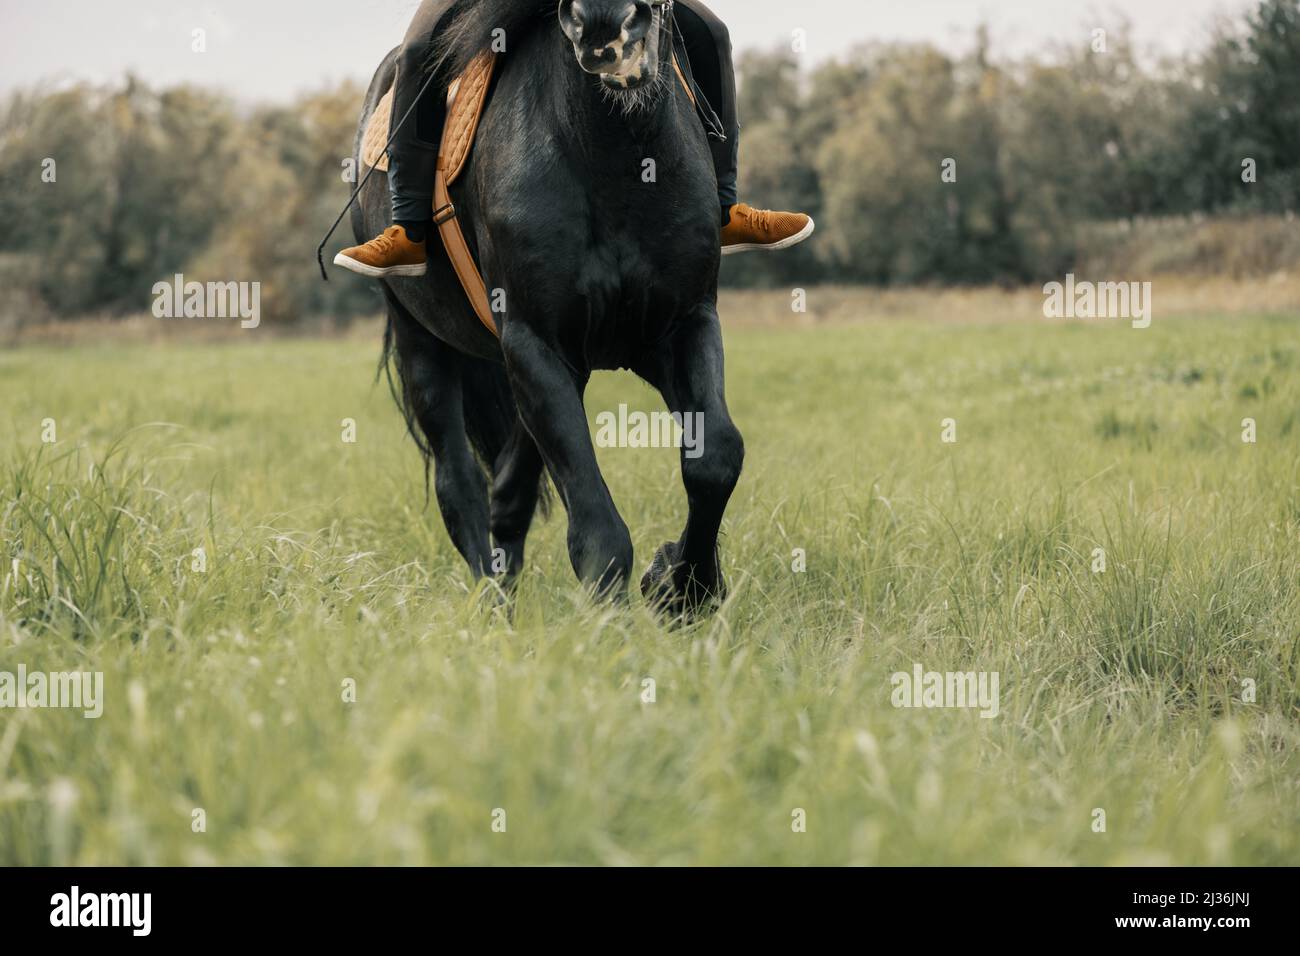 Rider galloping a black horse in field. Stock Photo